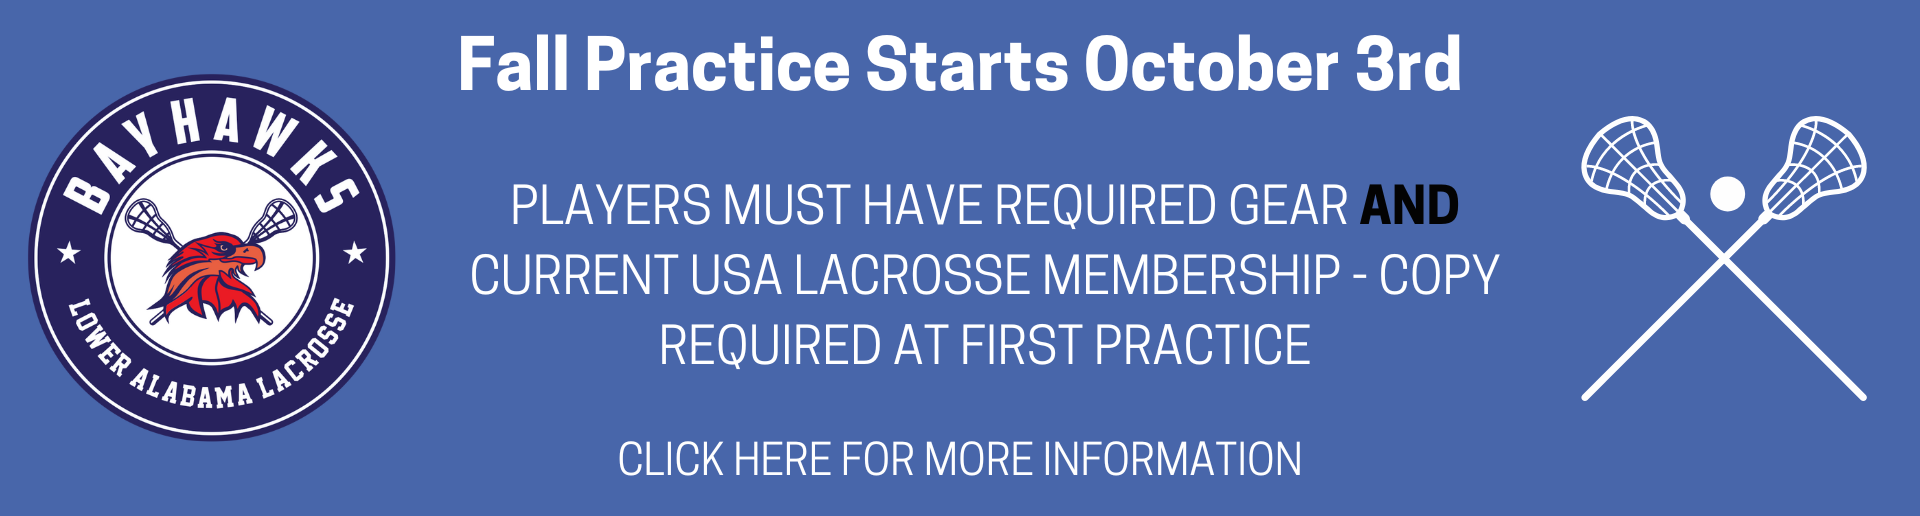 FALL PRACTICE INFORMATION